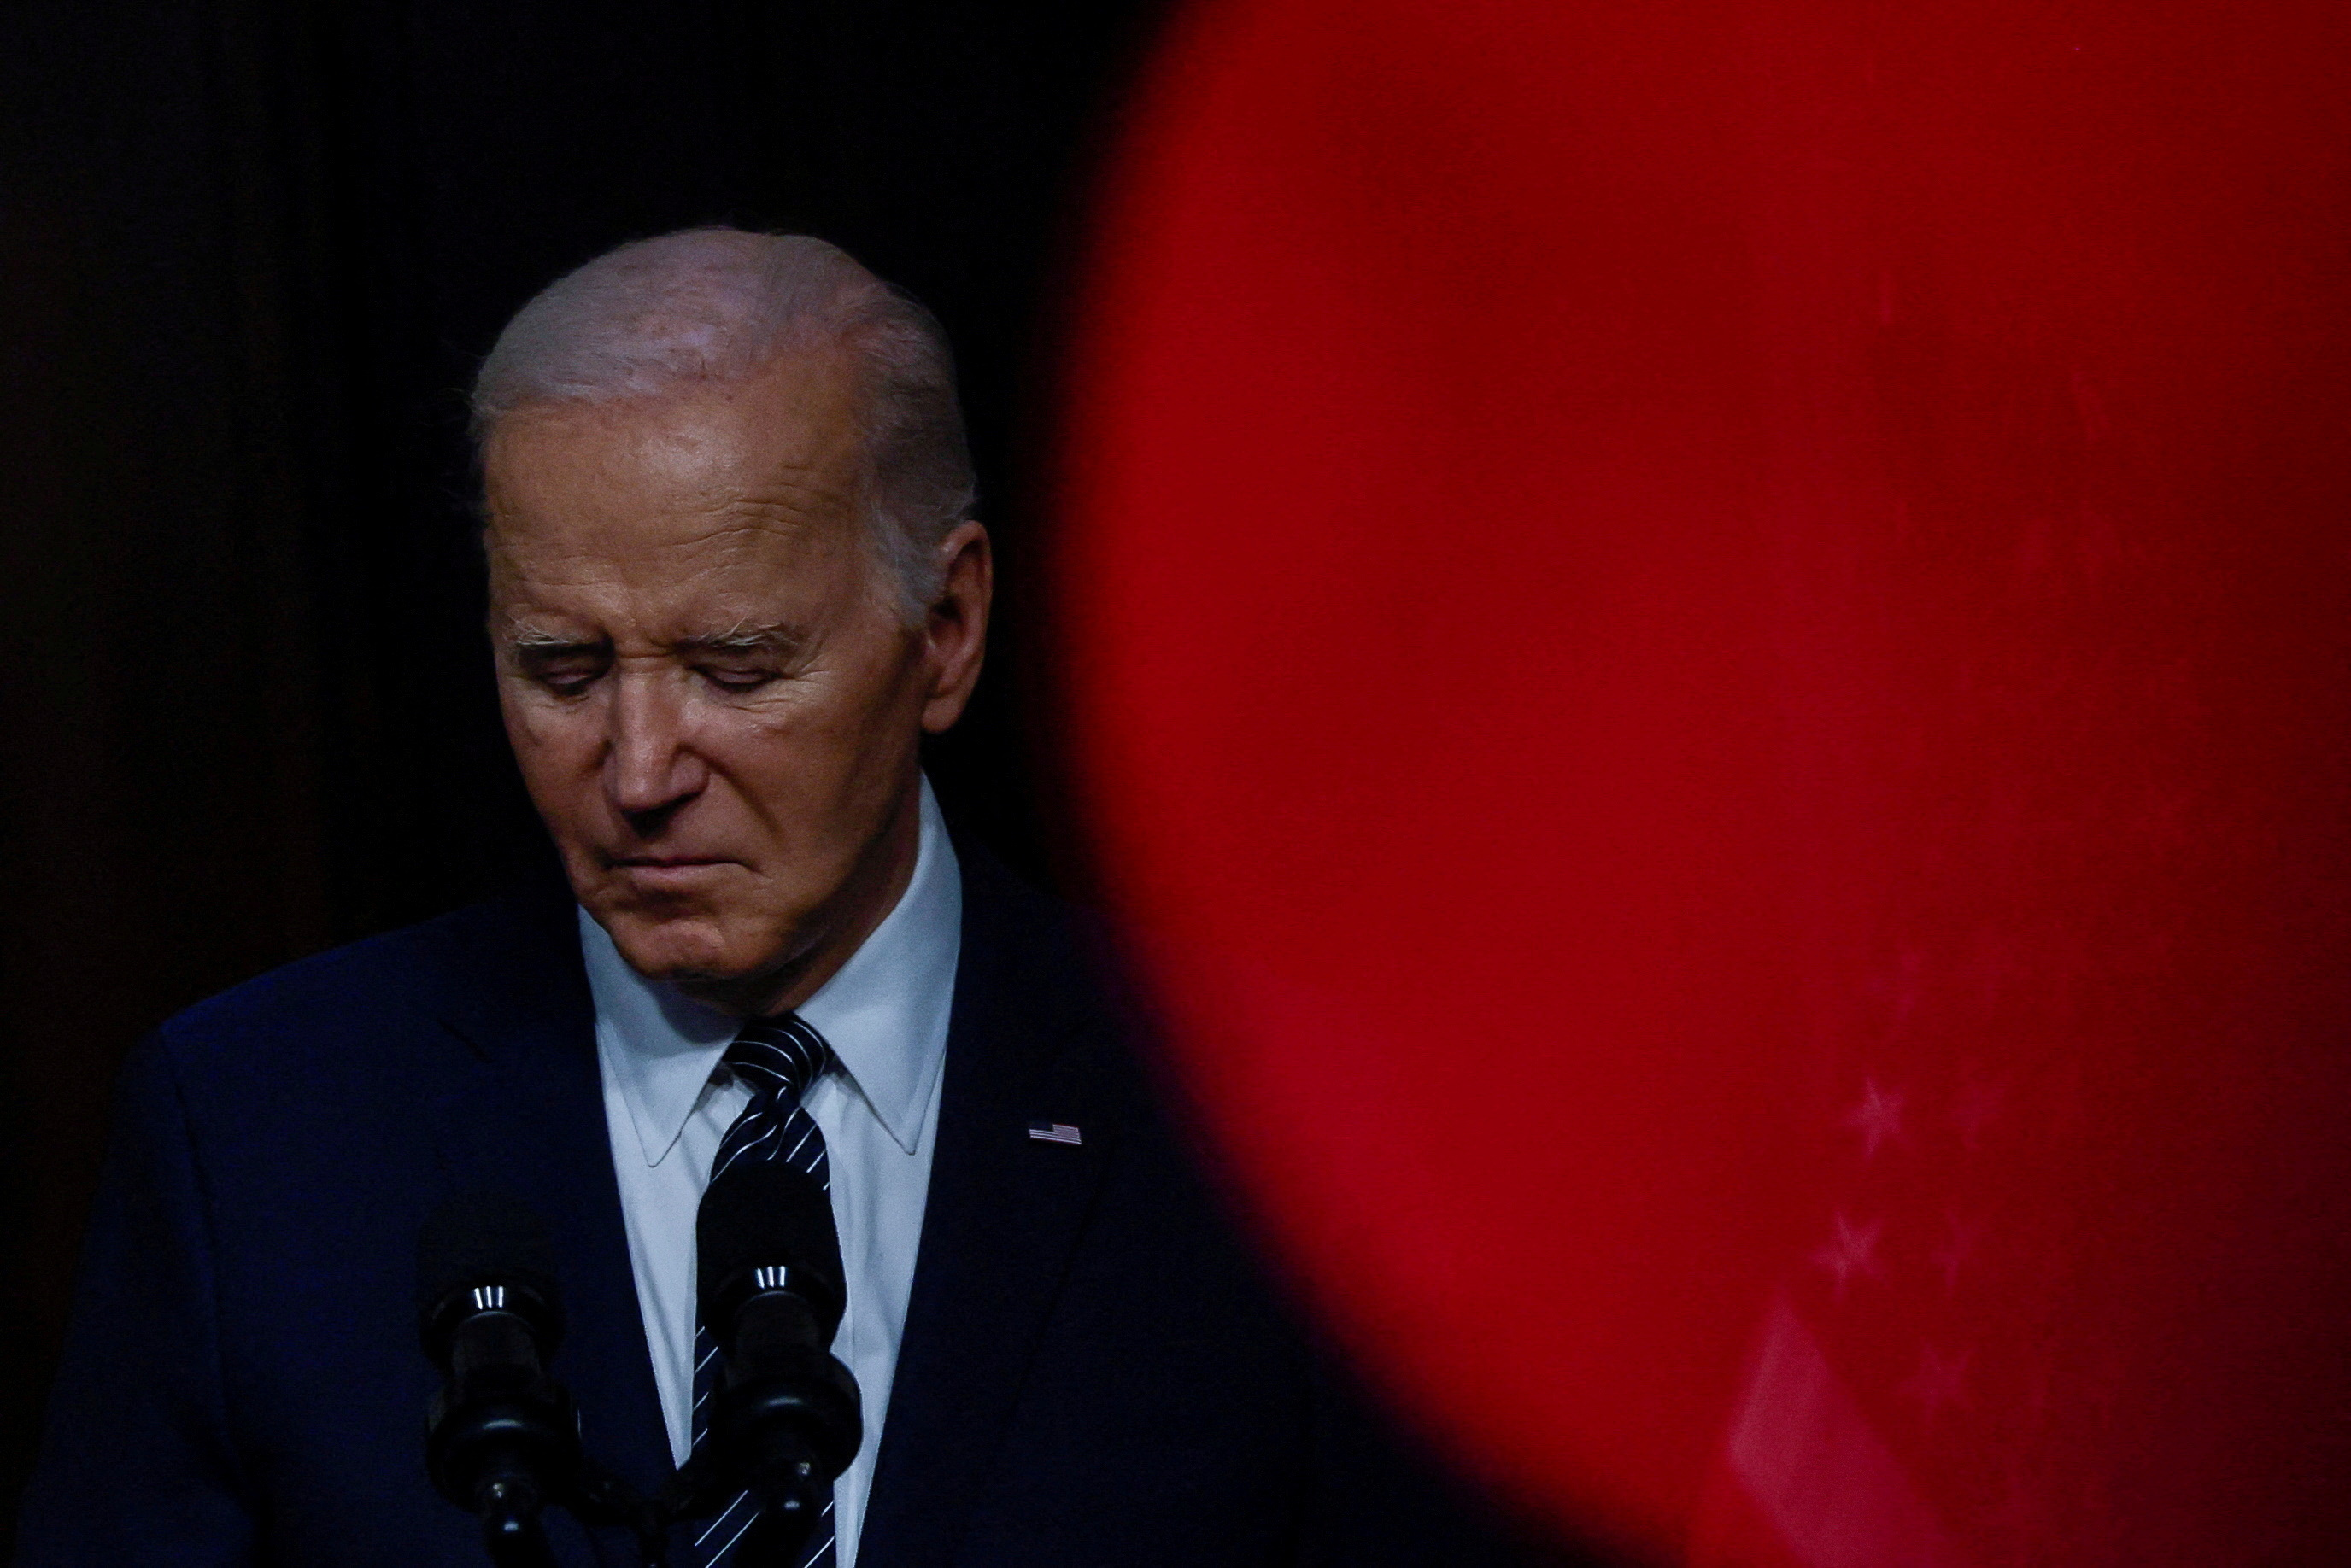 Biden delivers remarks on lowering healthcare costs in Washington